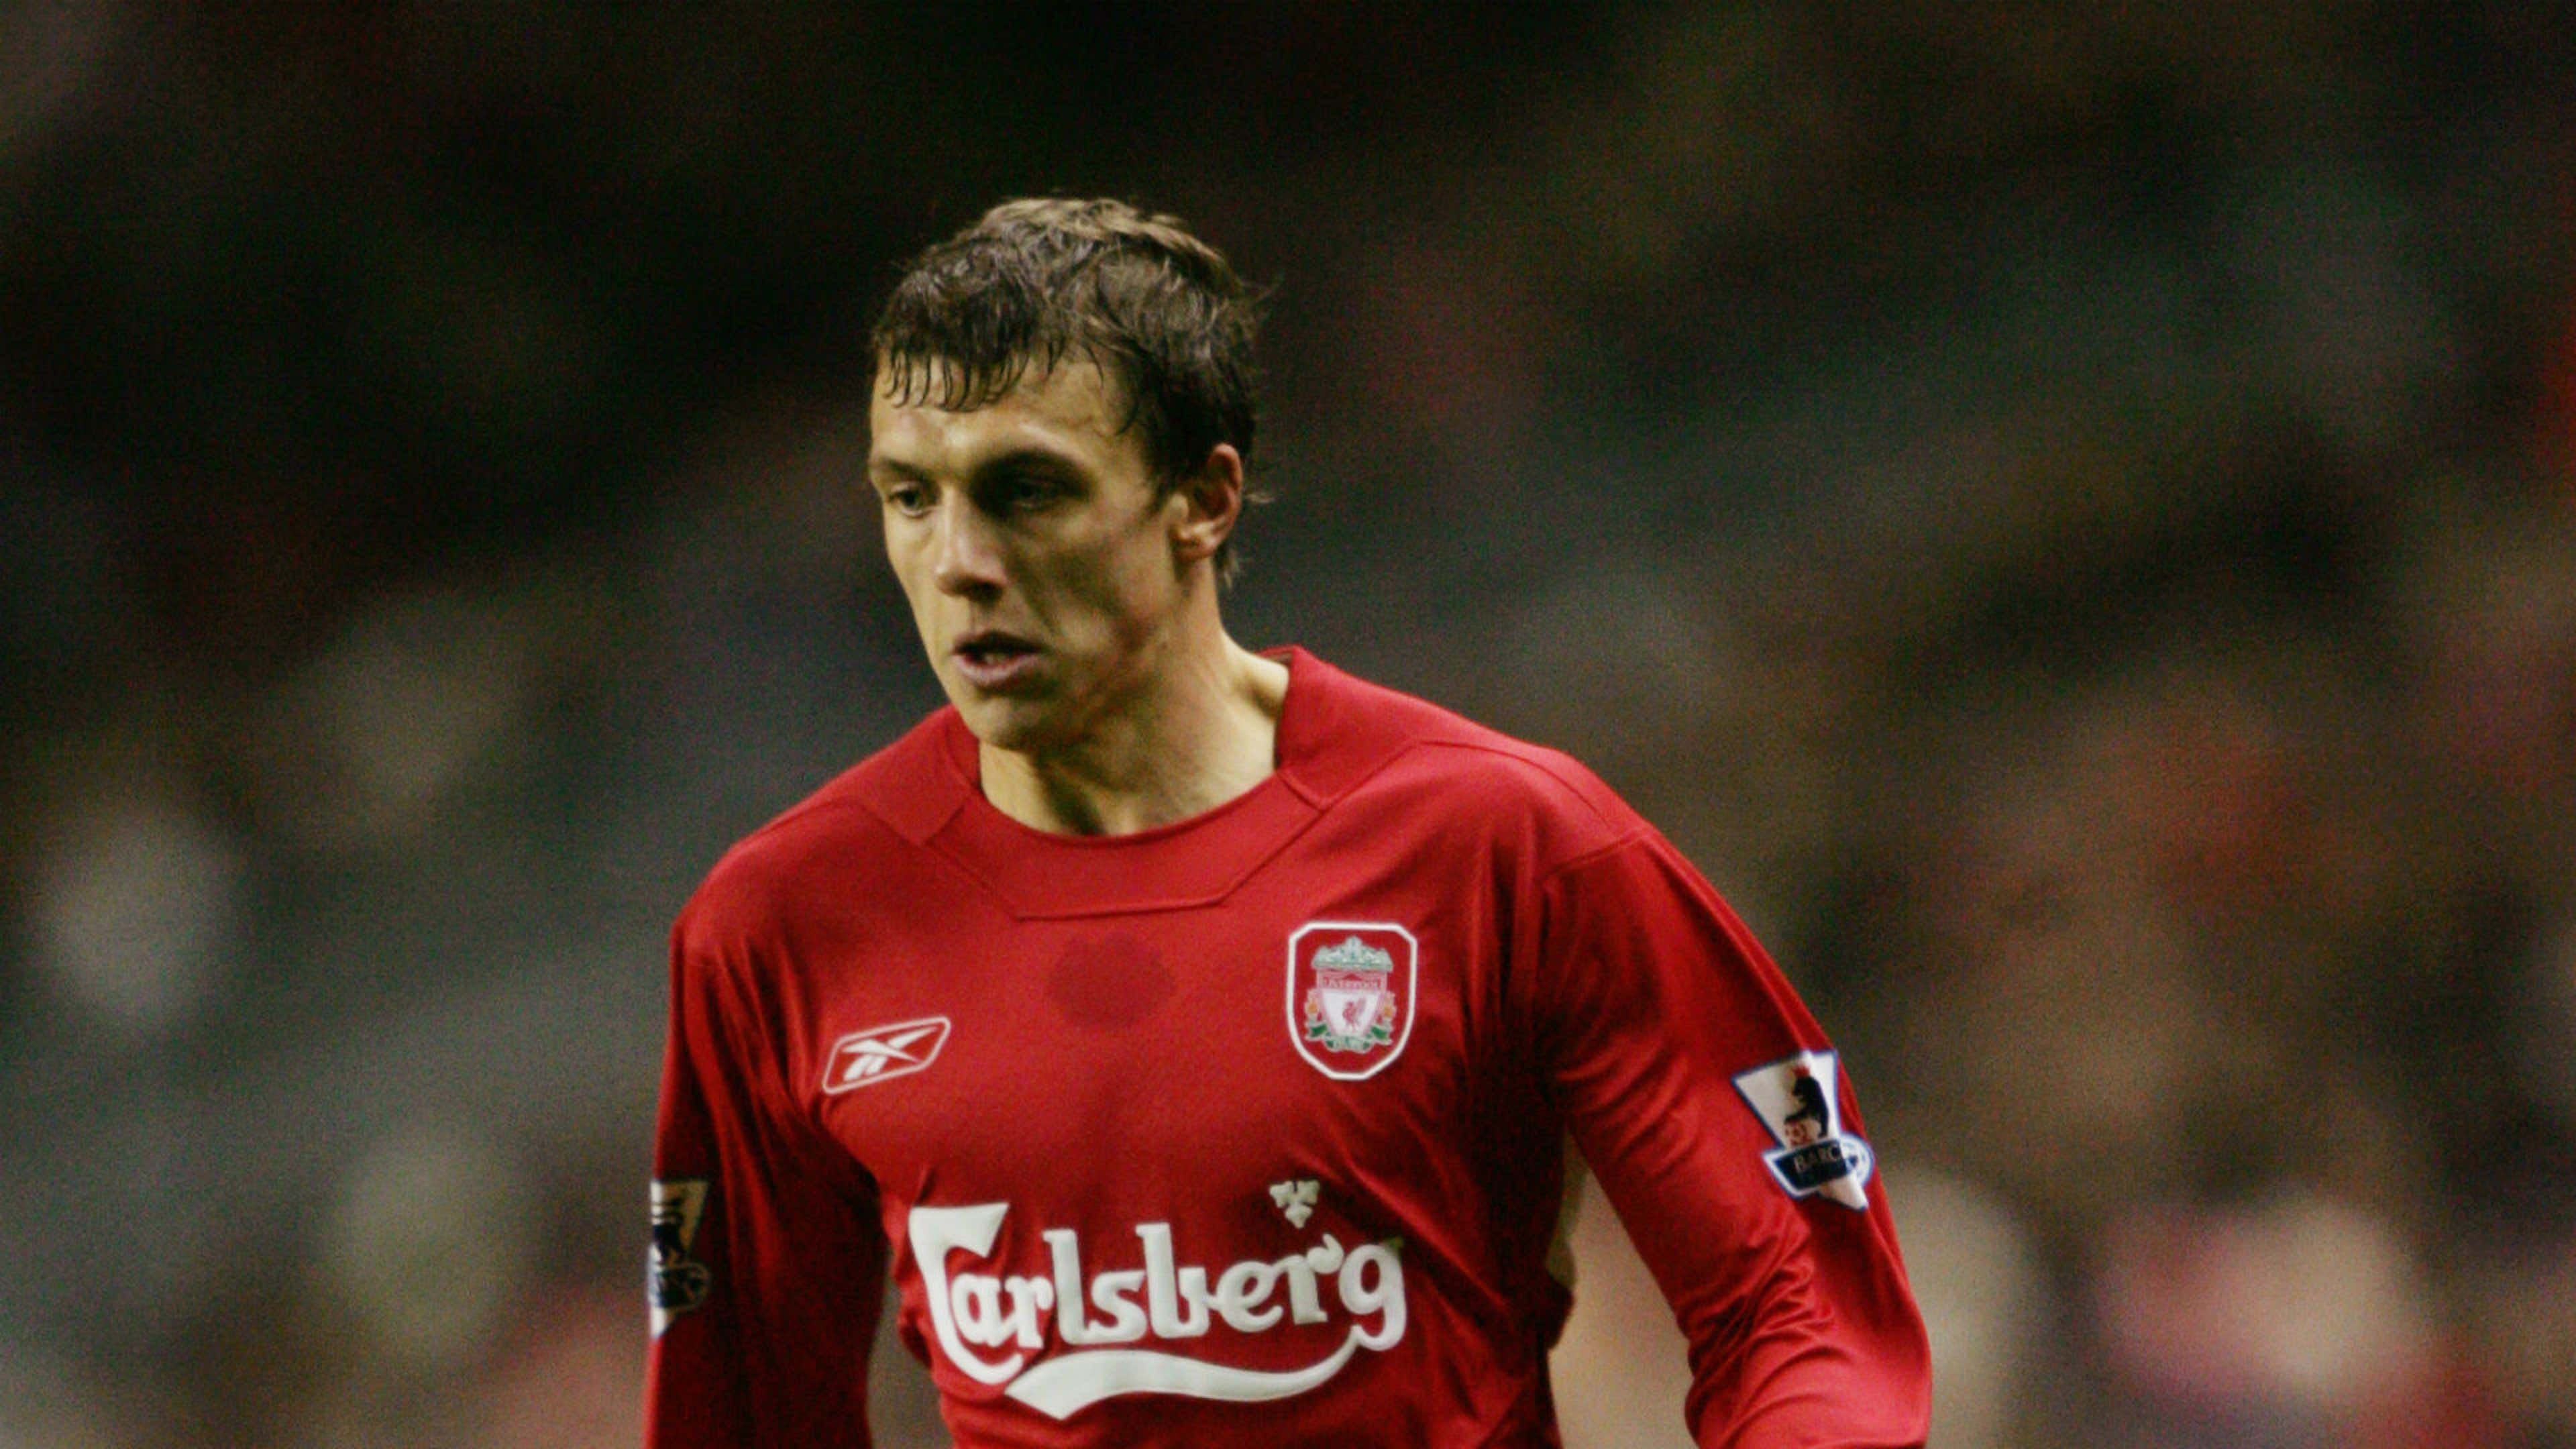 Former Liverpool man Stephen Warnock reflects on dark phase in his career.